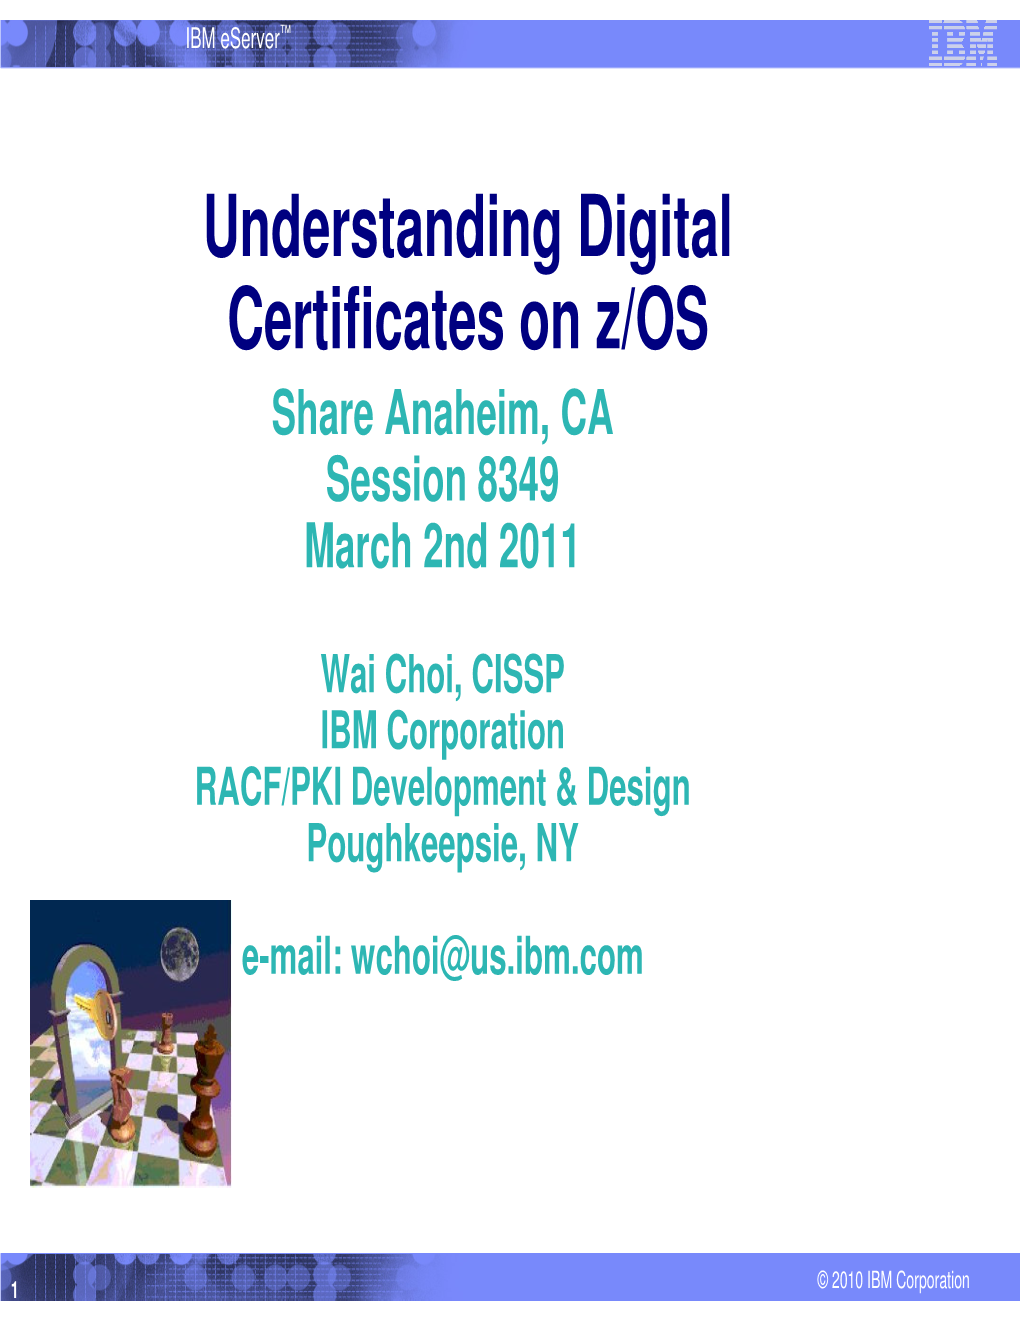 Understanding Digital Certificates on Z/OS Share Anaheim, CA Session 8349 March 2Nd 2011